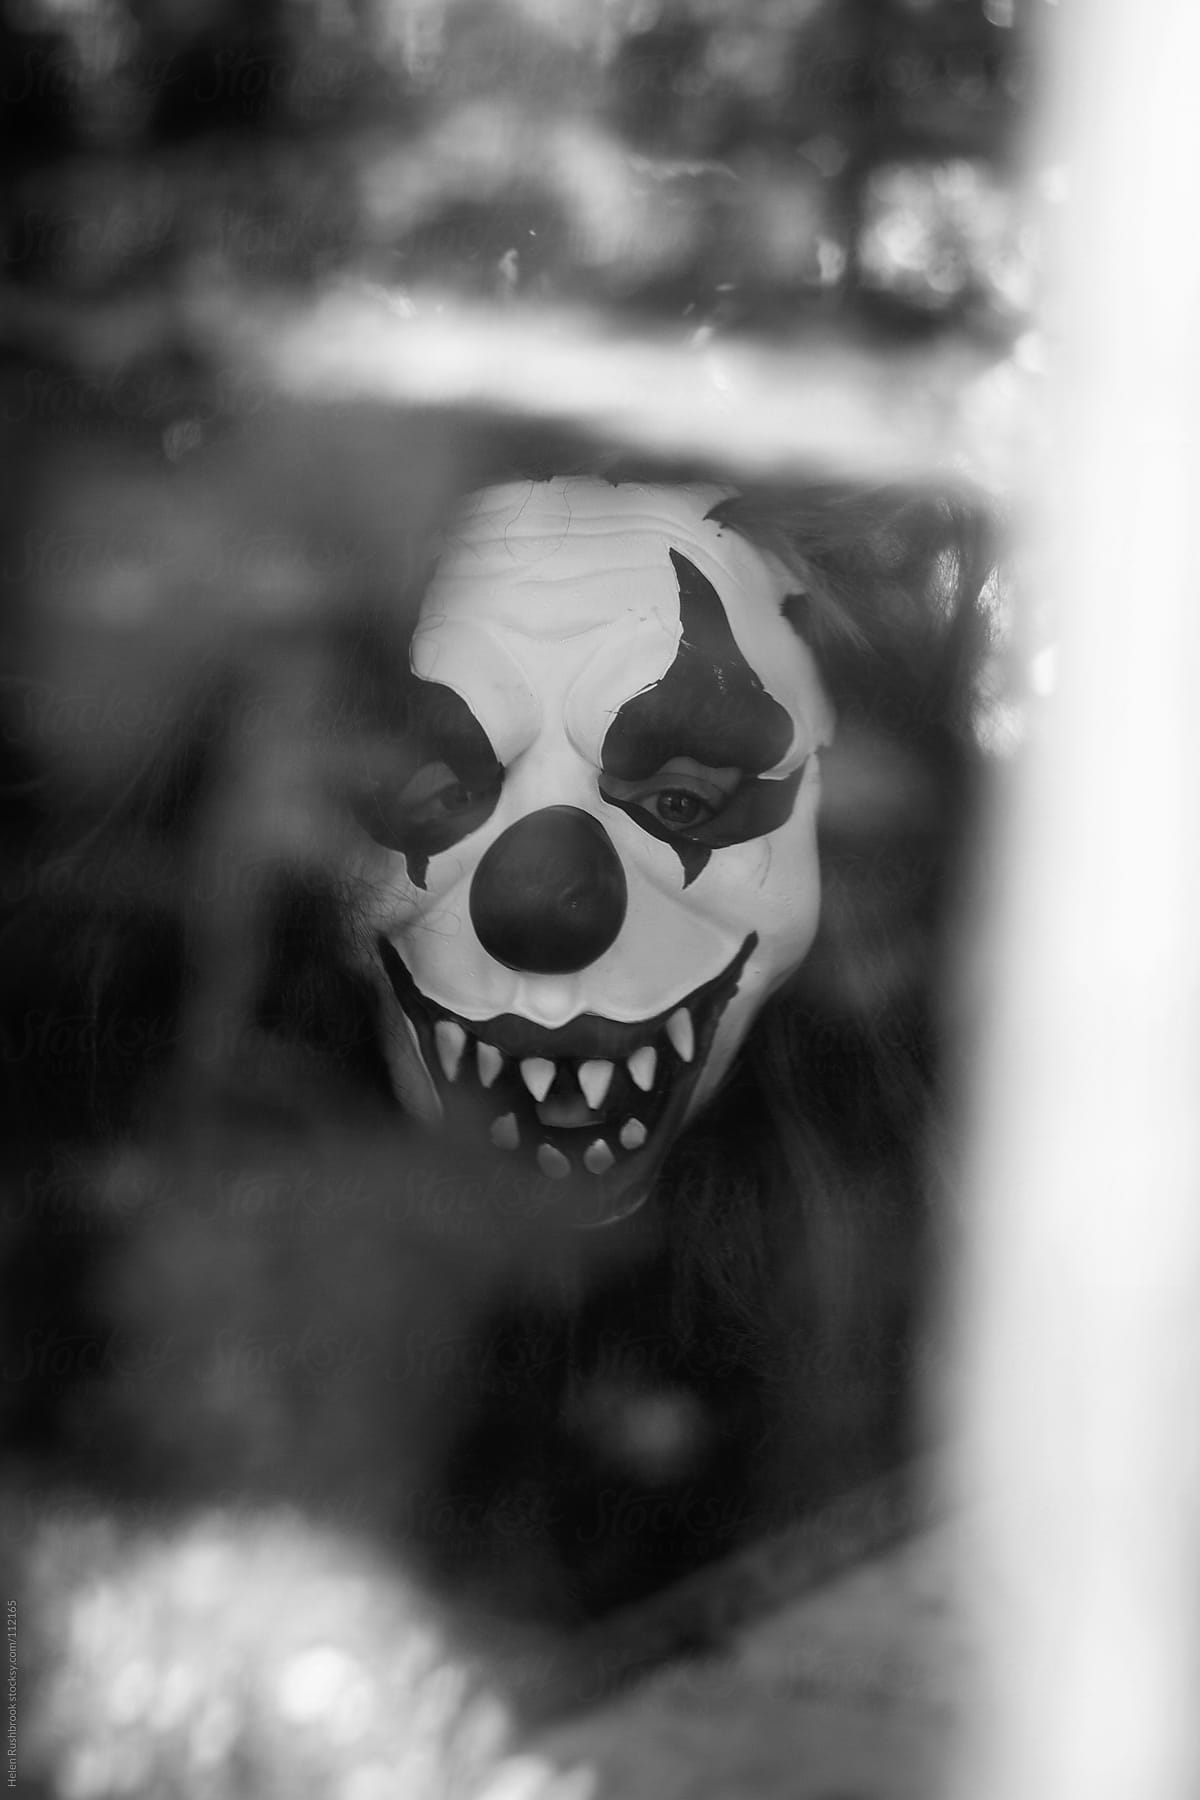 Black and White images of a Creepy clown.